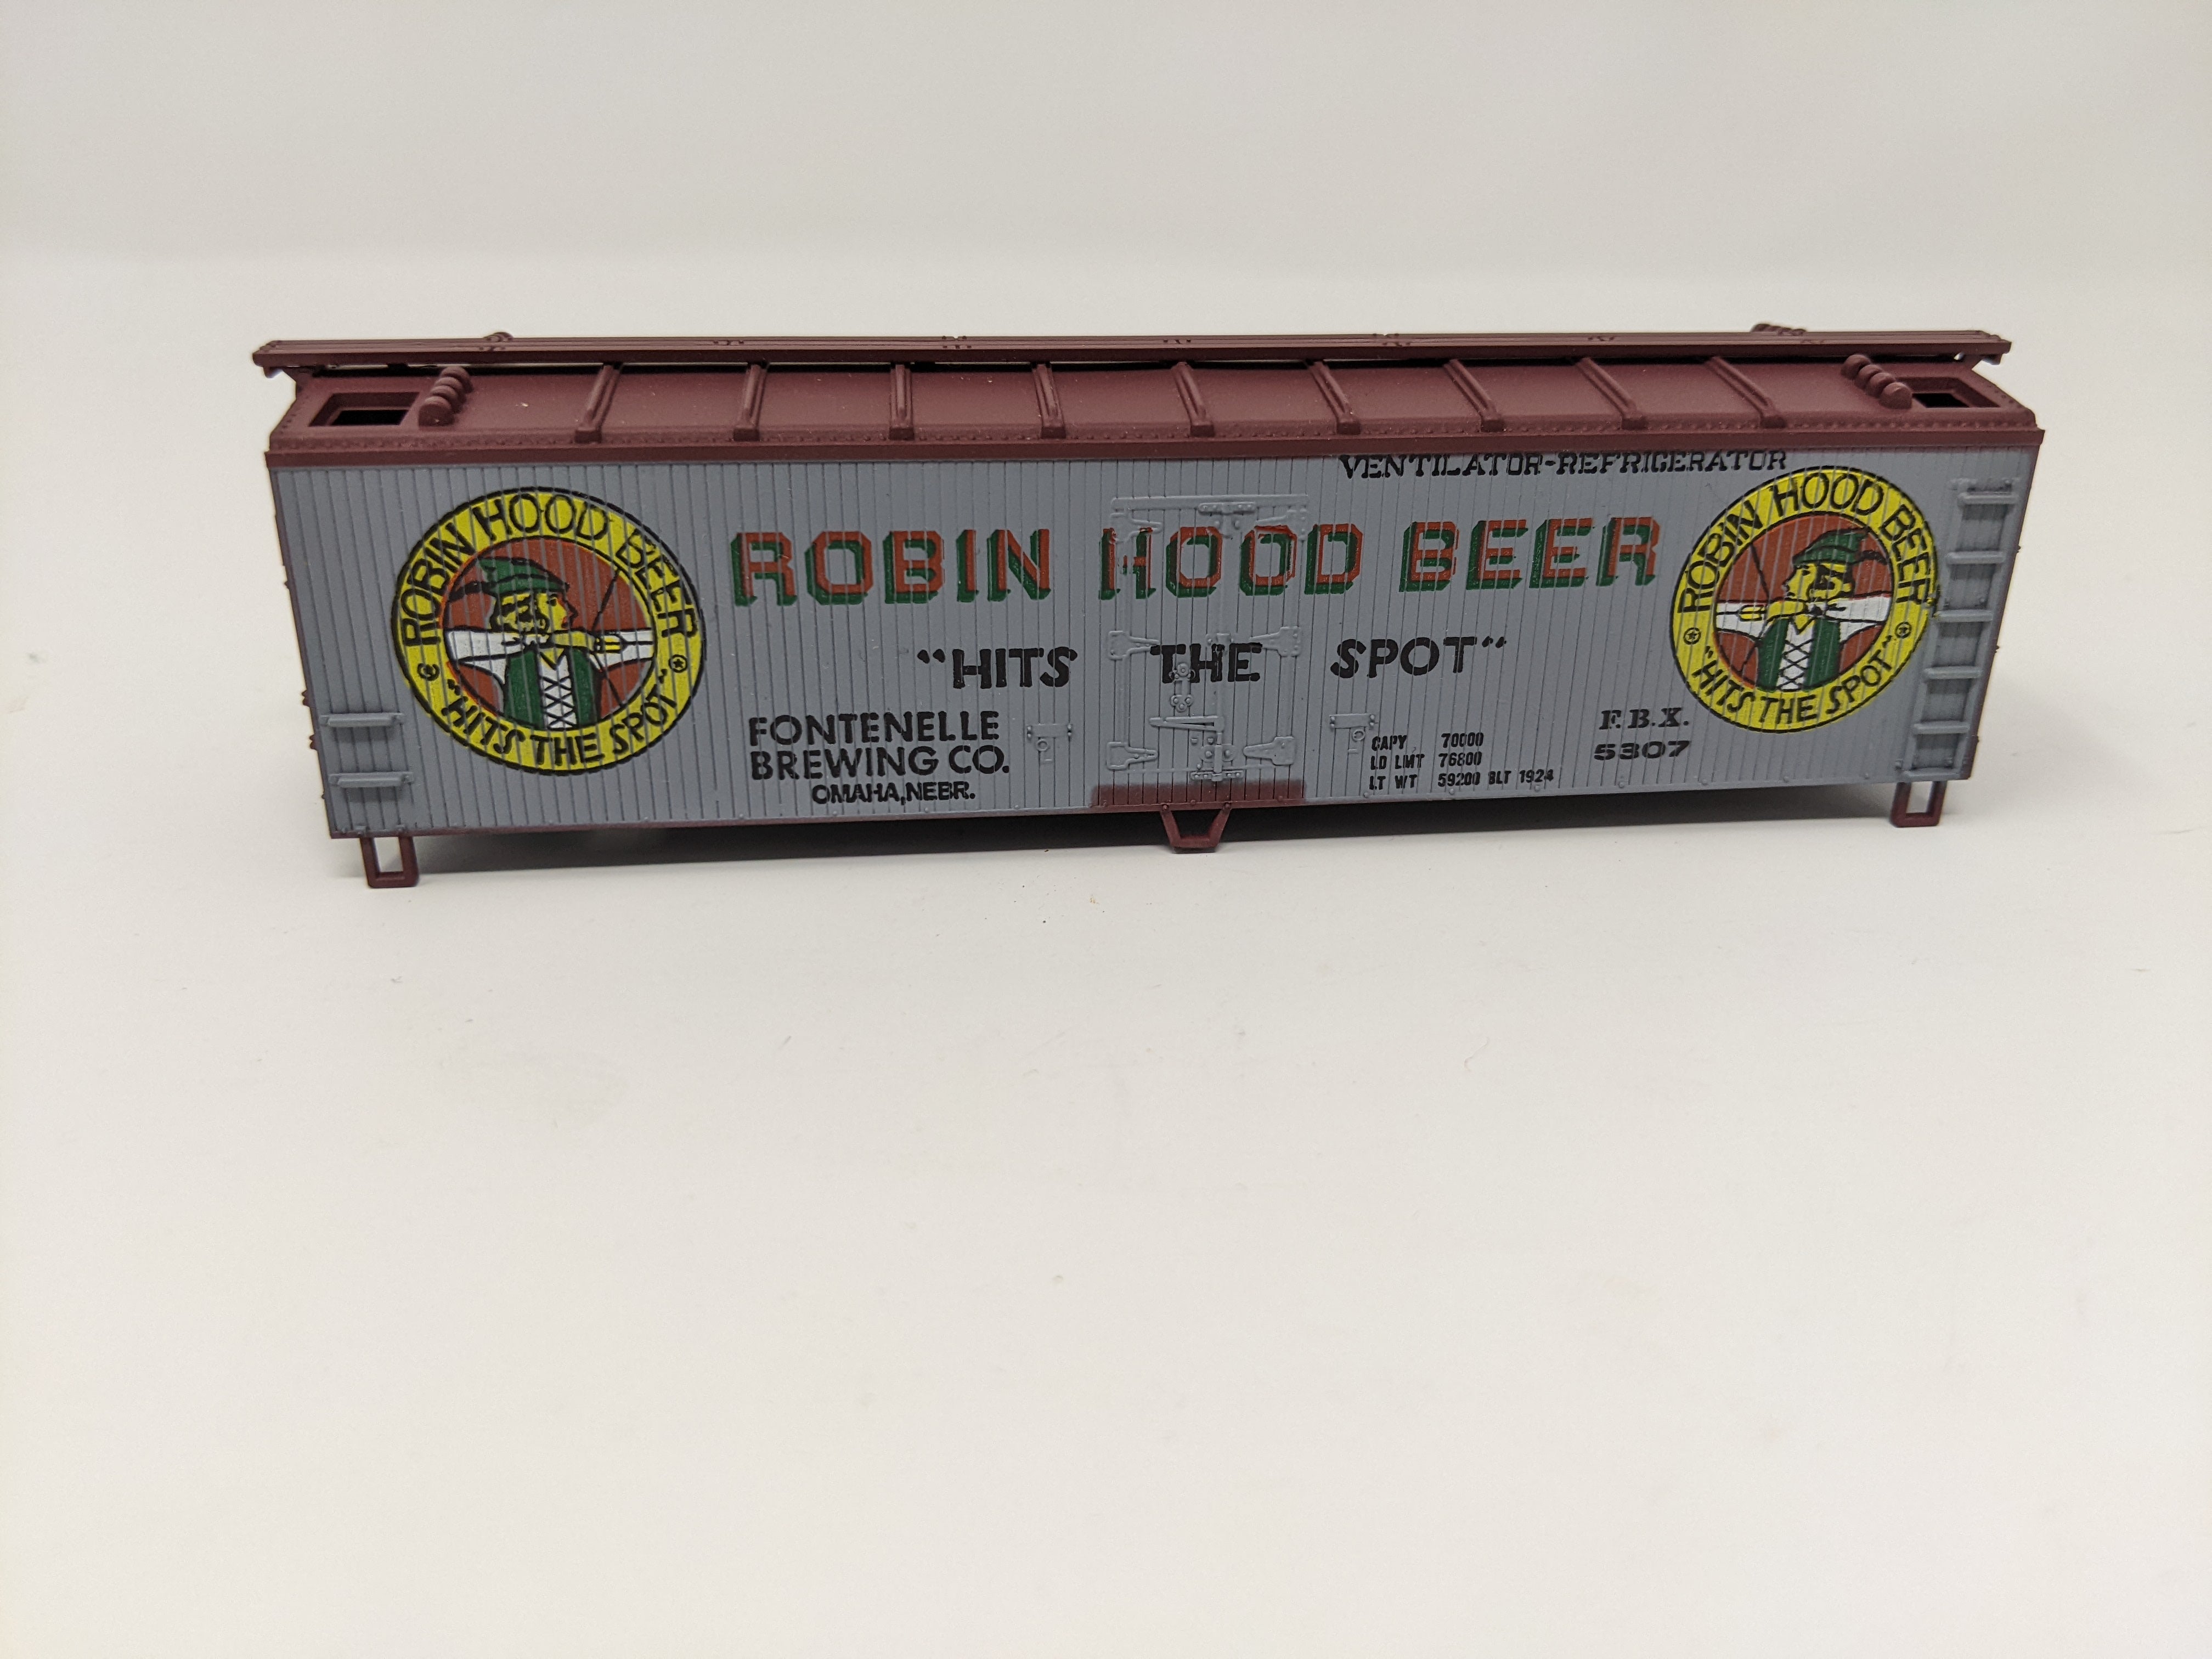 USED HO Scale, Robin Hood Beer, Fontenelle Brewing Co - Shell onlyFBX #5307